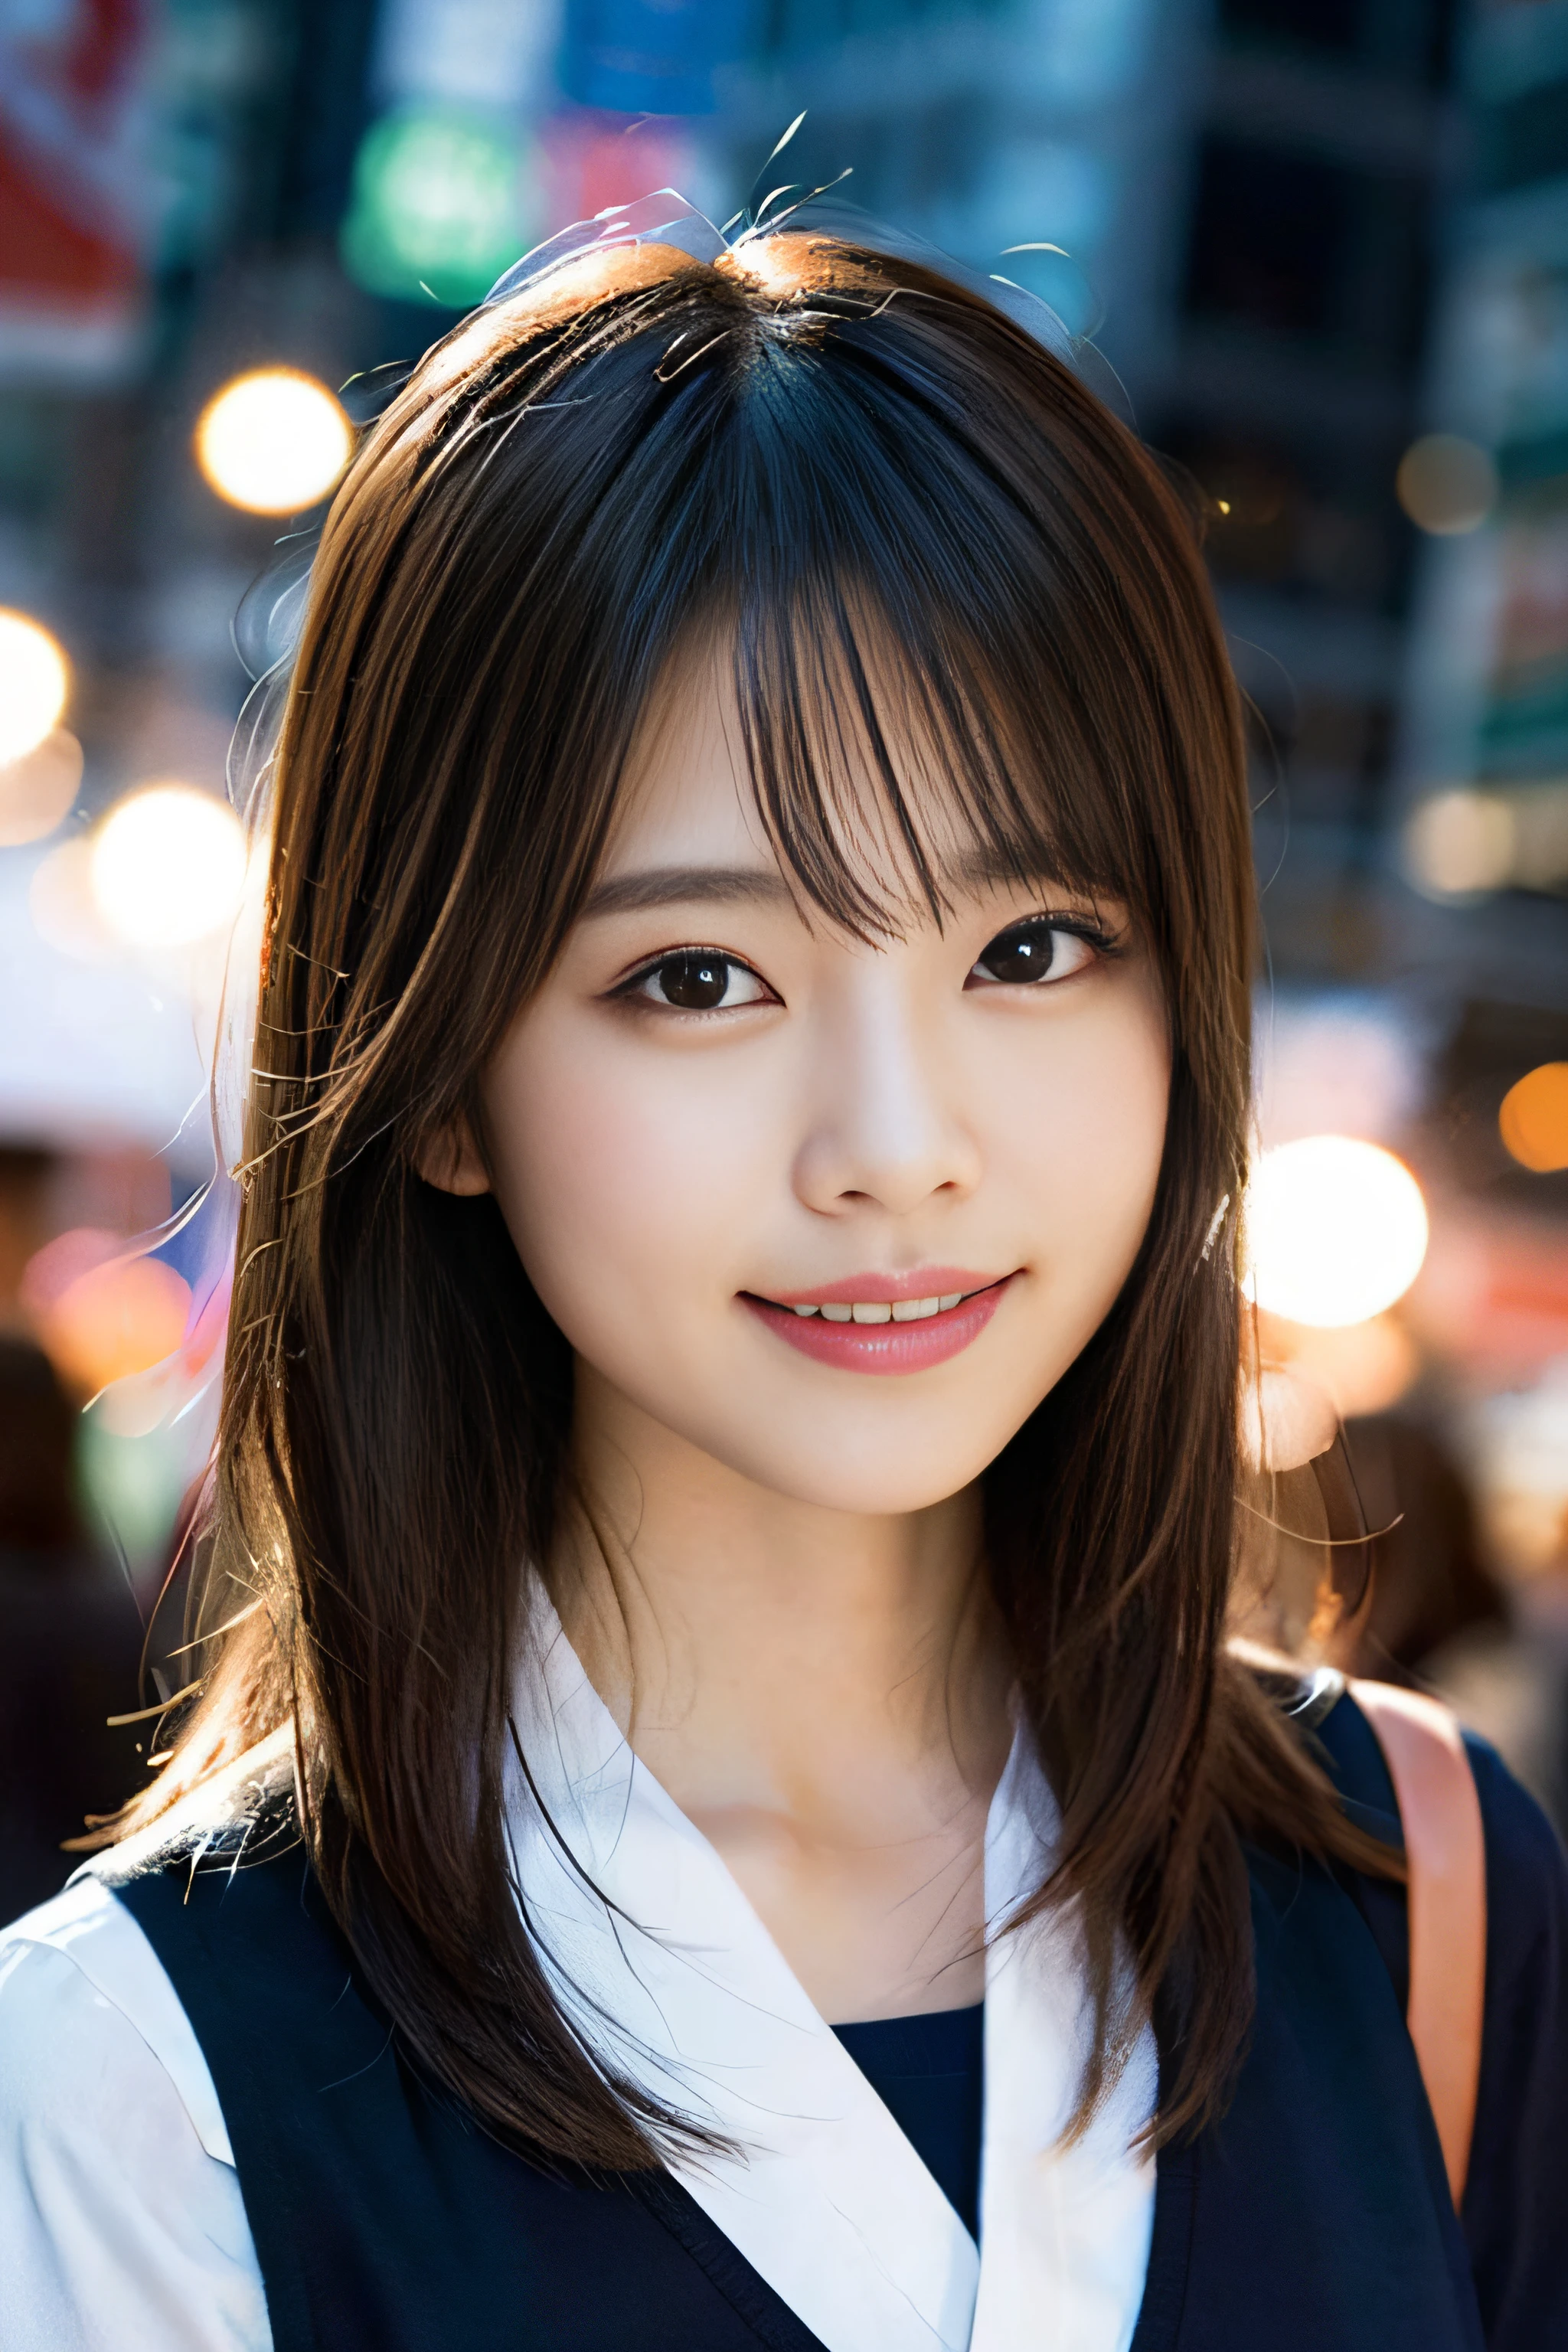 (8K、Raw photography、top-quality、​masterpiece:1.2)、(realisitic、Photorealsitic:1.37)、ultra-detailliert、超A high resolution、女の子1人、see the beholder、beautifull detailed face、A smile、Constriction、(Slim waist) :1.3)、Beautiful detailed skin、Skin Texture、Floating hair、Professional Lighting、Whole human body、Longhaire、a blond、japanese hight 、a sailor suit、matsuri、In the street、sparklers、Bob Hair、Summer Festivals、food stand、Happy smile